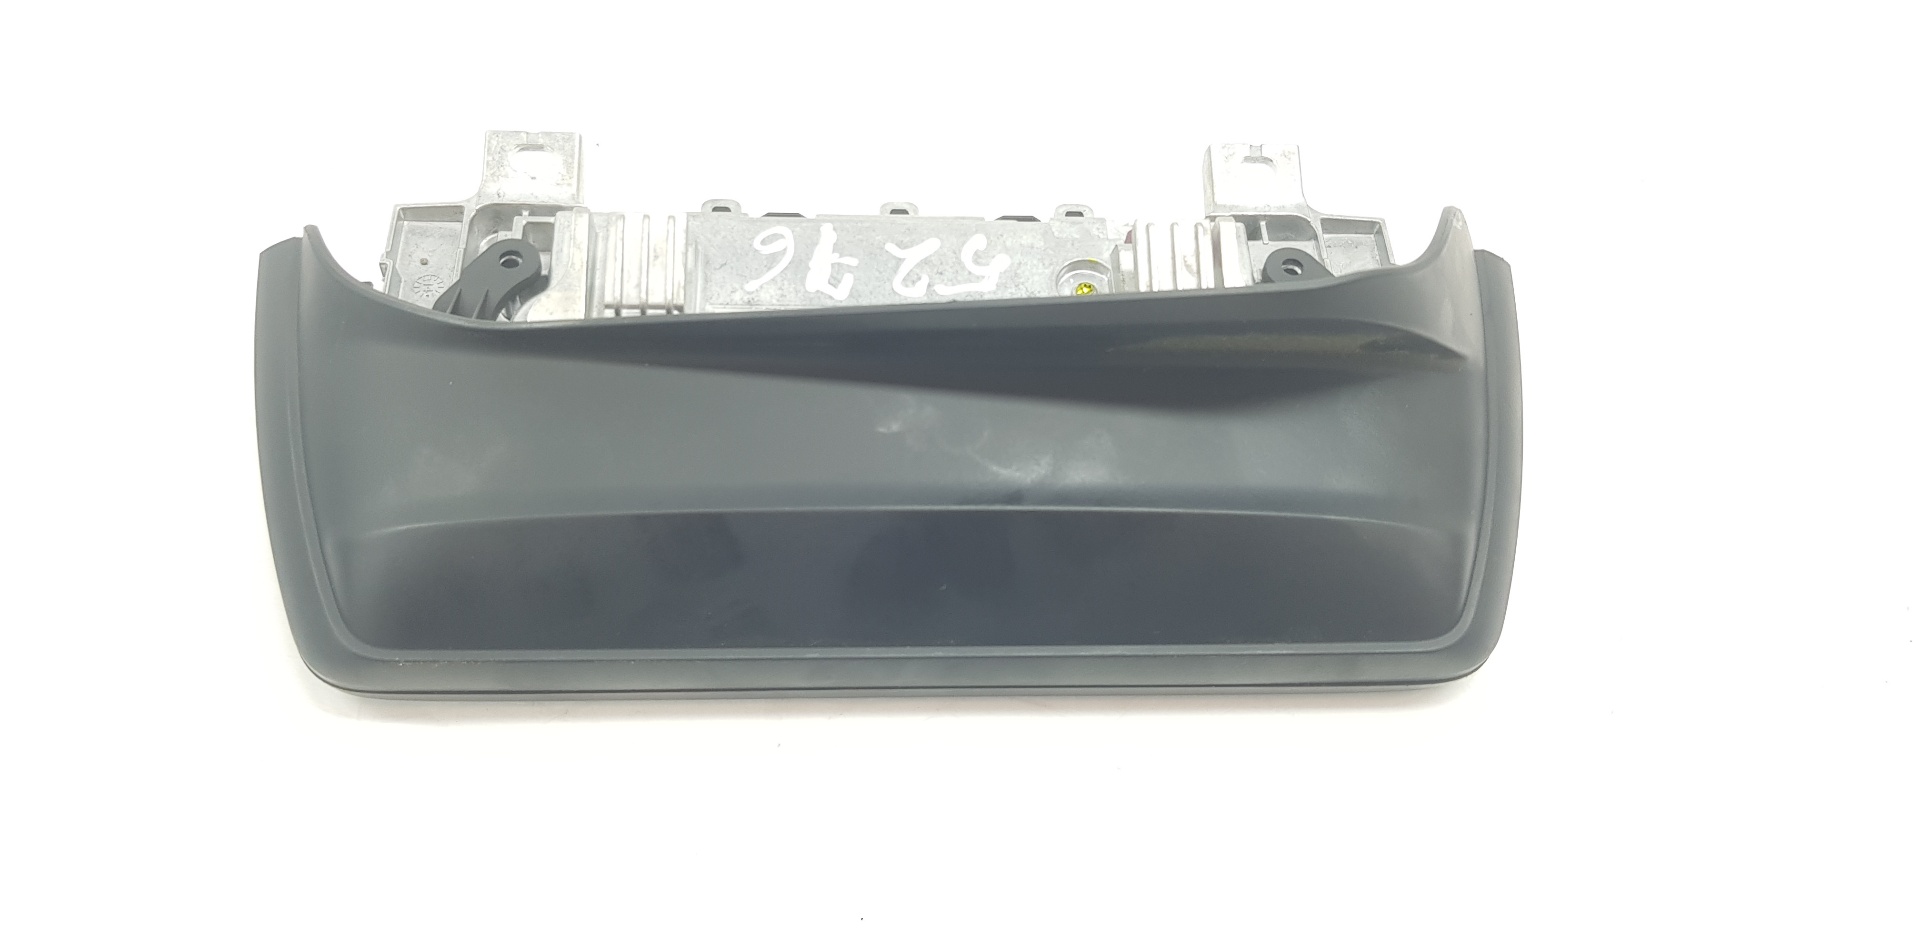 BMW 1 Series F20/F21 (2011-2020) Other Interior Parts 65509270391 19896791